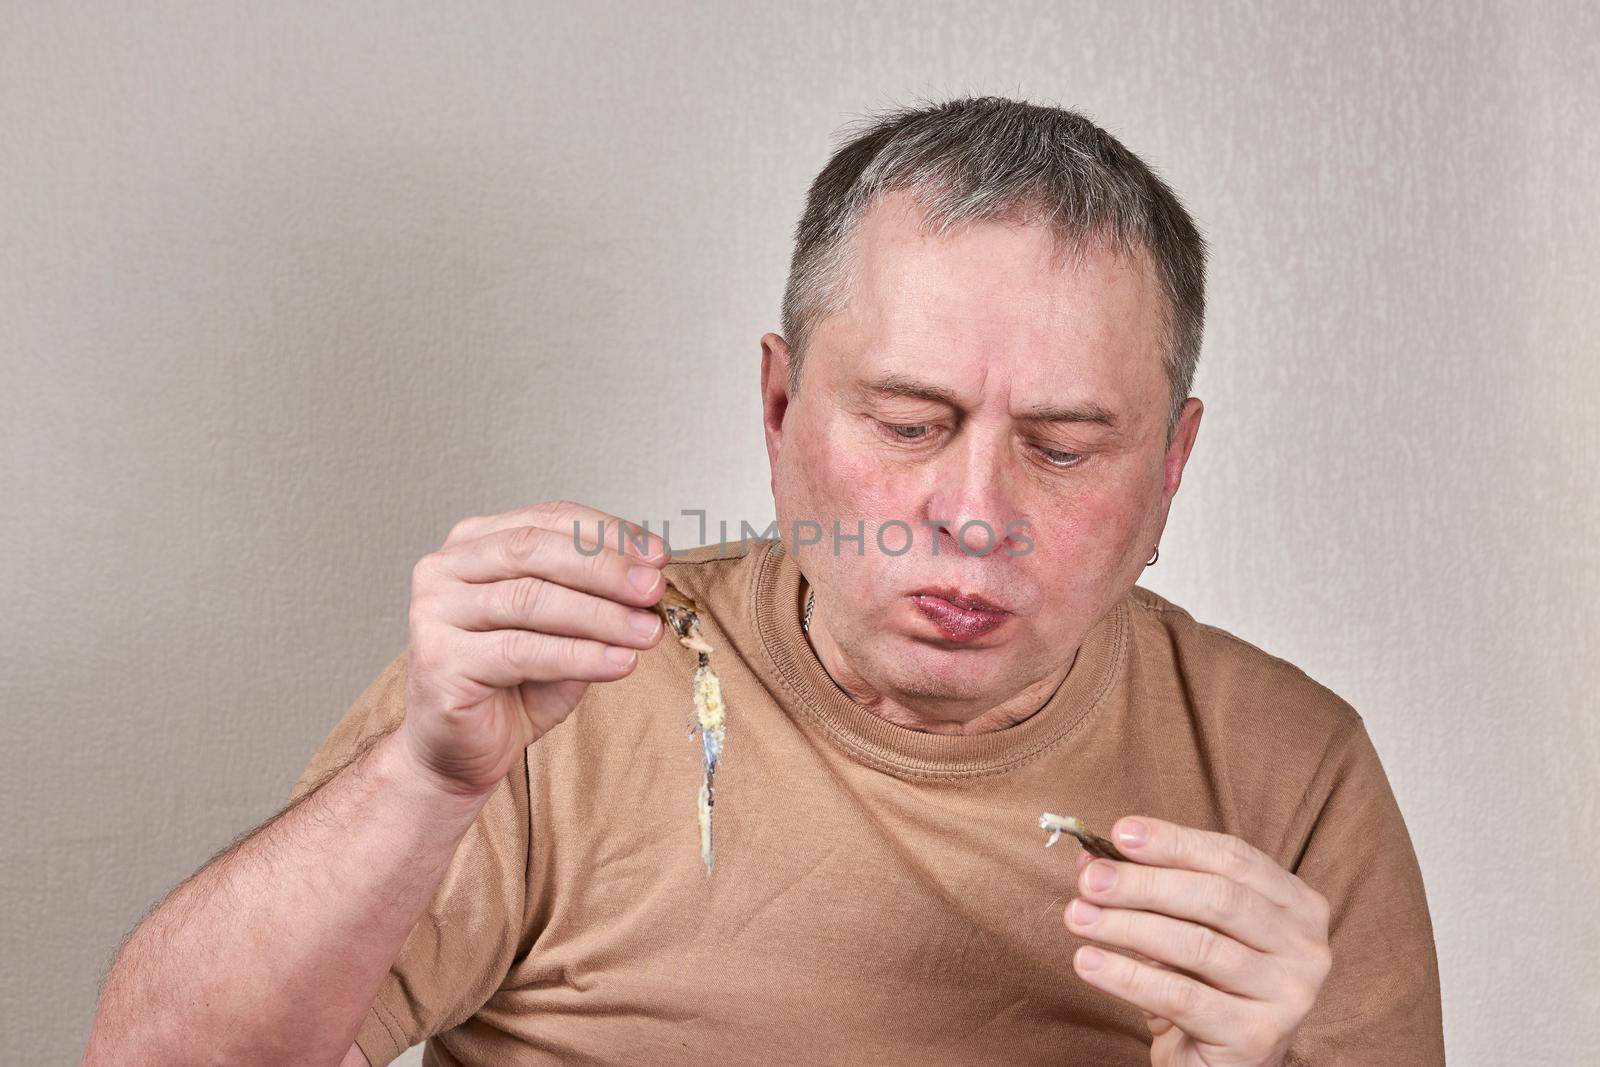 Man eating fried smelt fish holding fish with hands in front of face. Close up